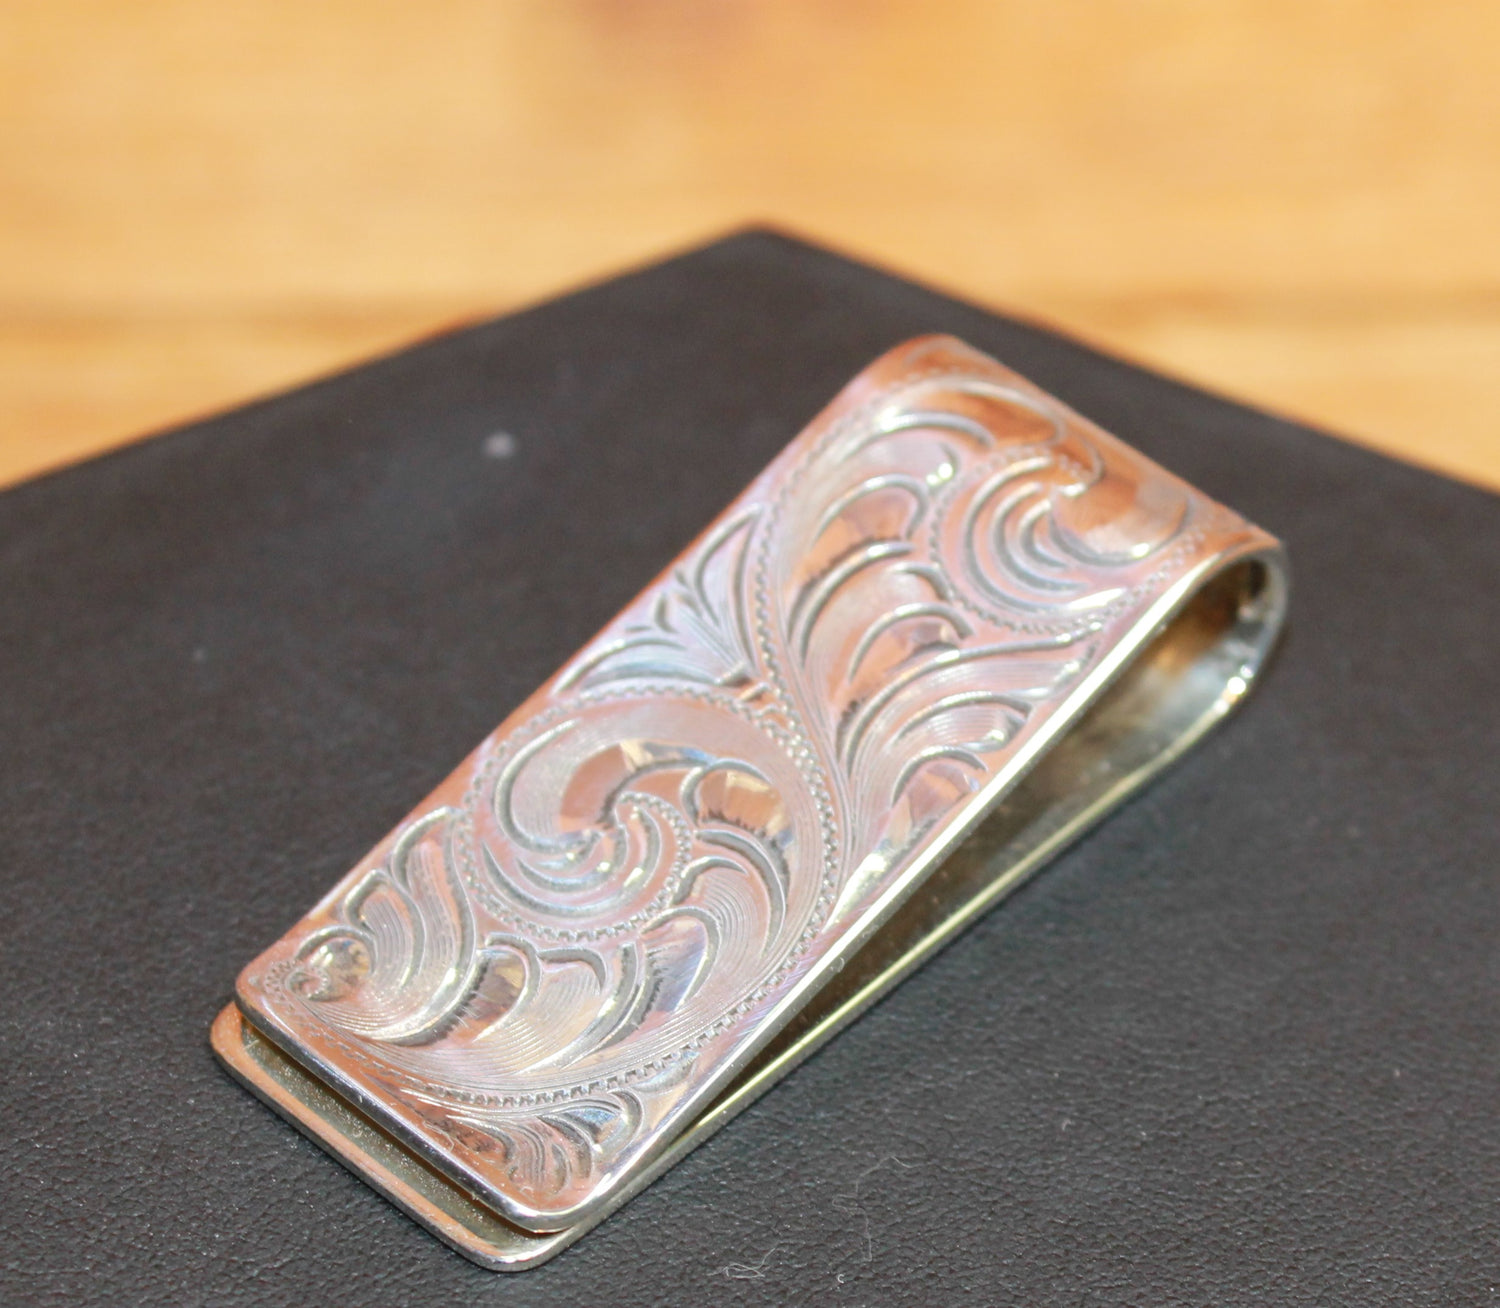 Engraved Sterling Silver Money Clip view of money clip